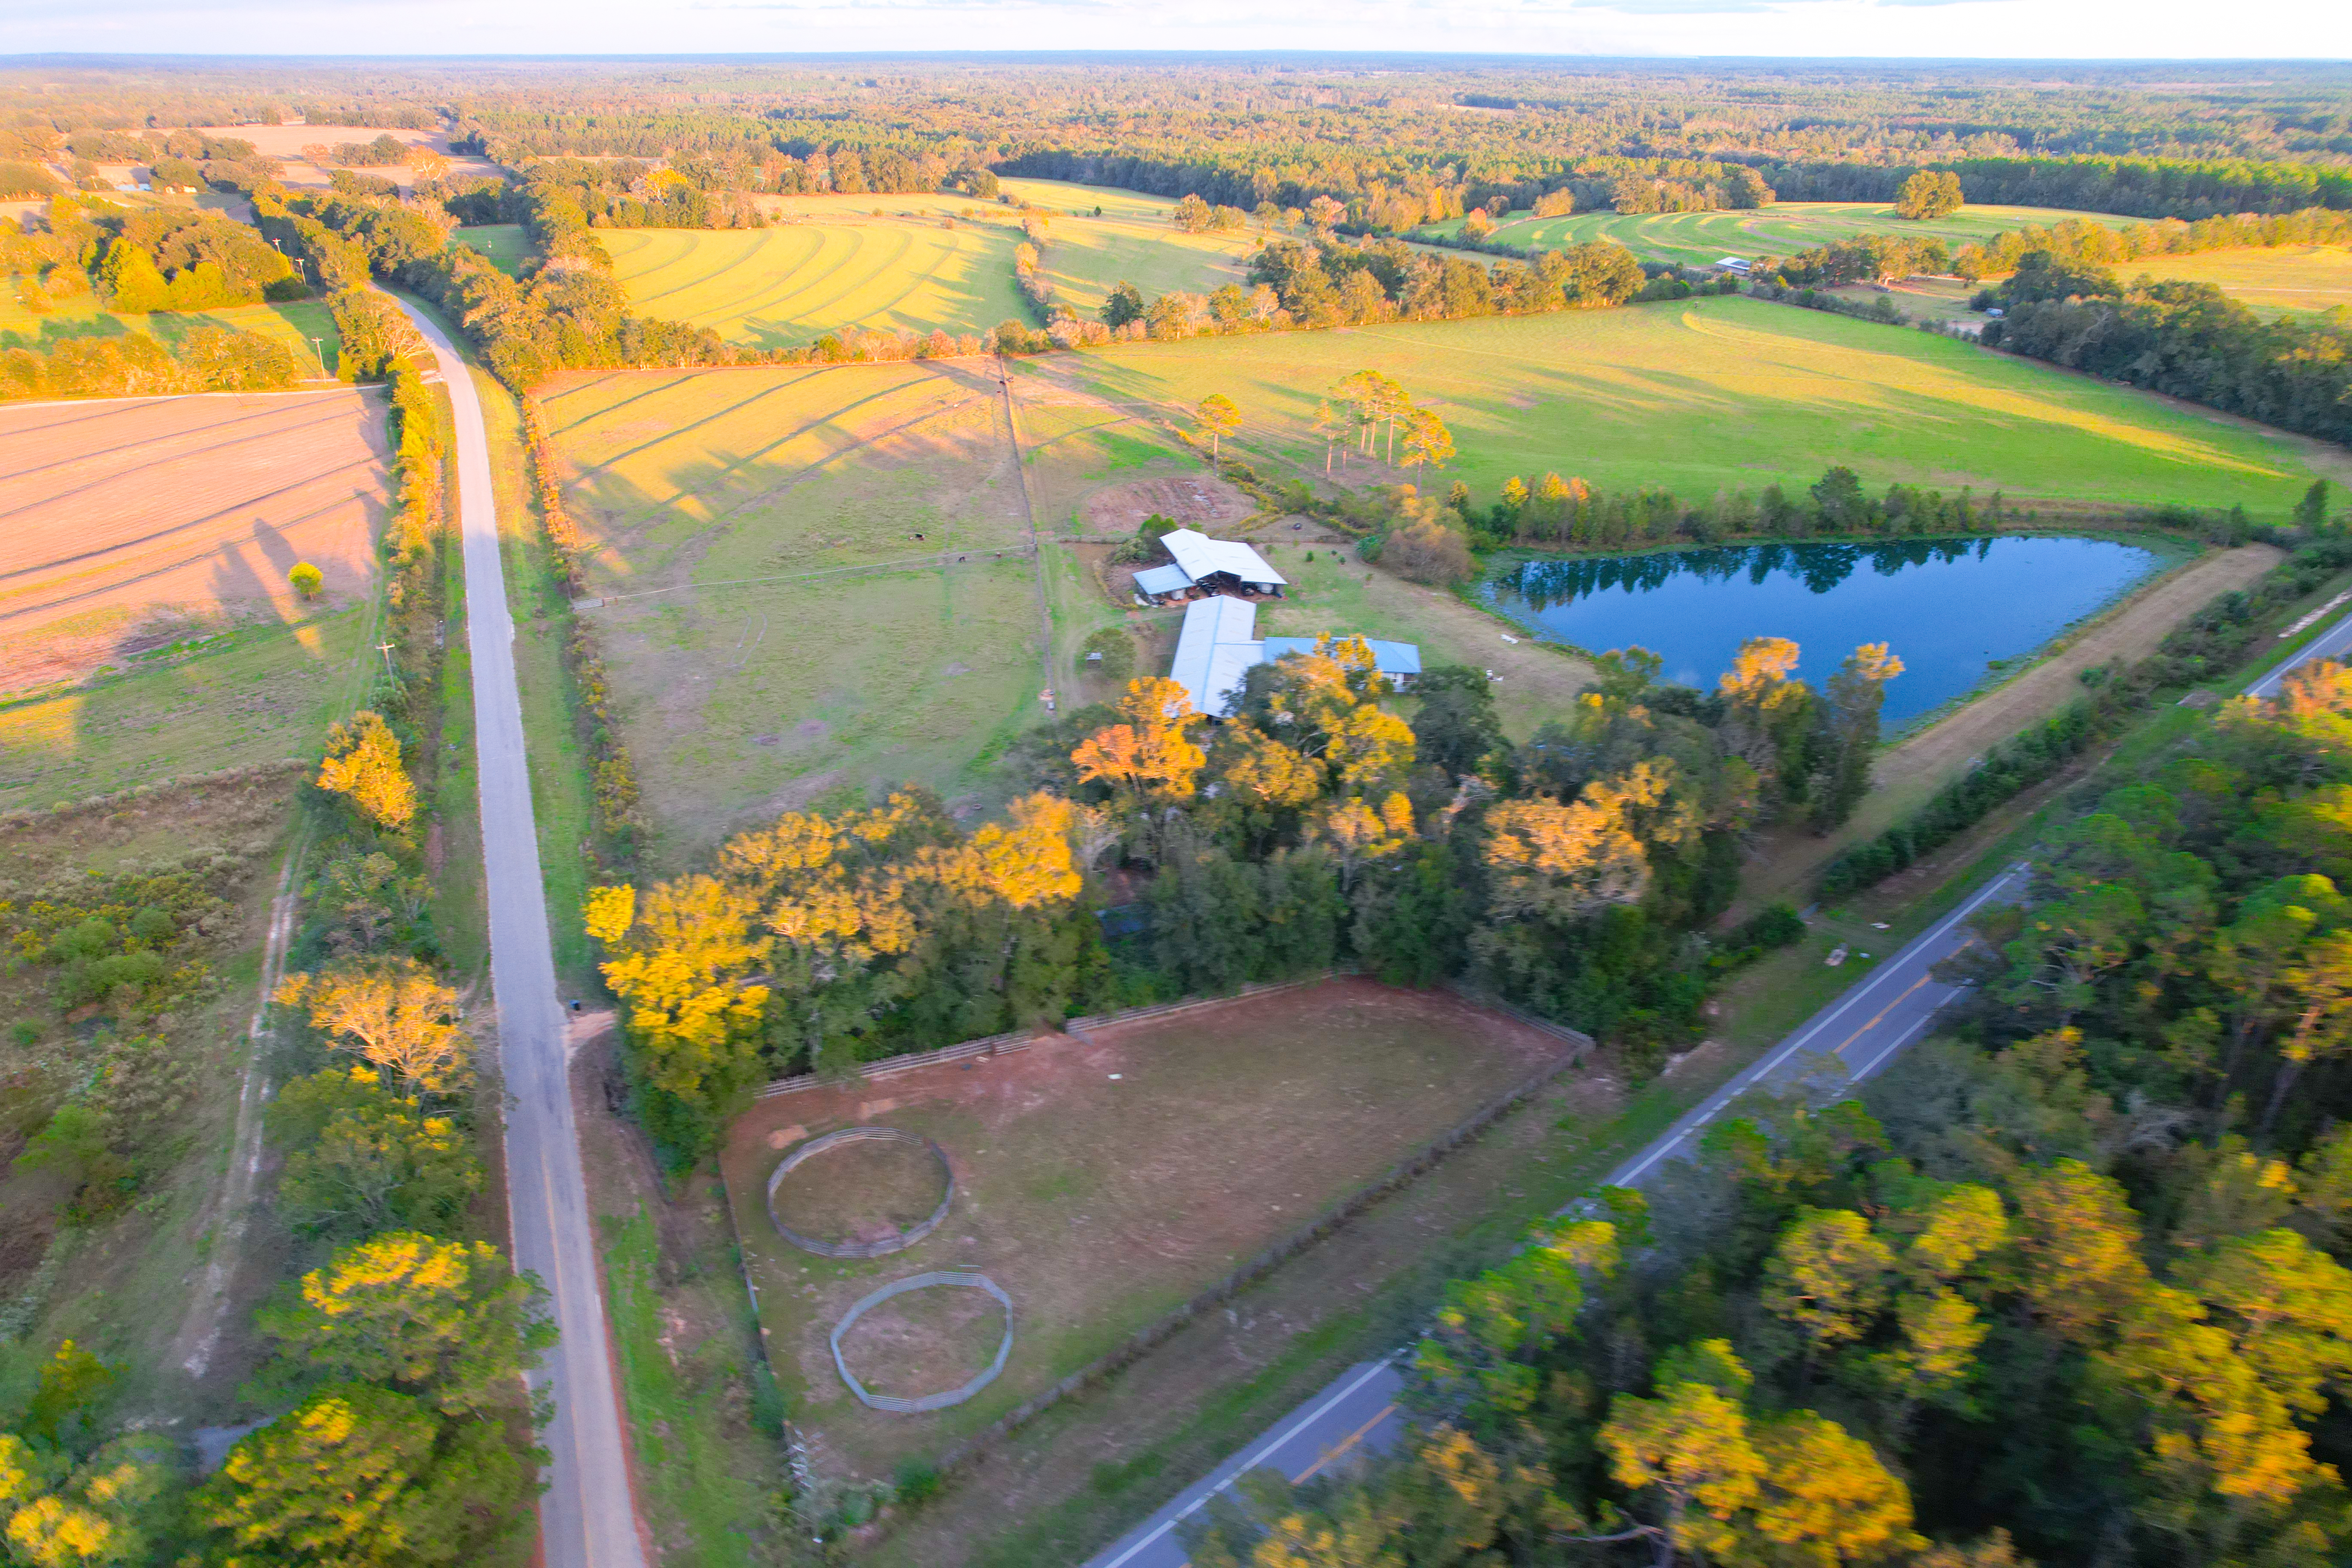 34-Acre Equestrian Estate With Office, Barn And Guest Cottage